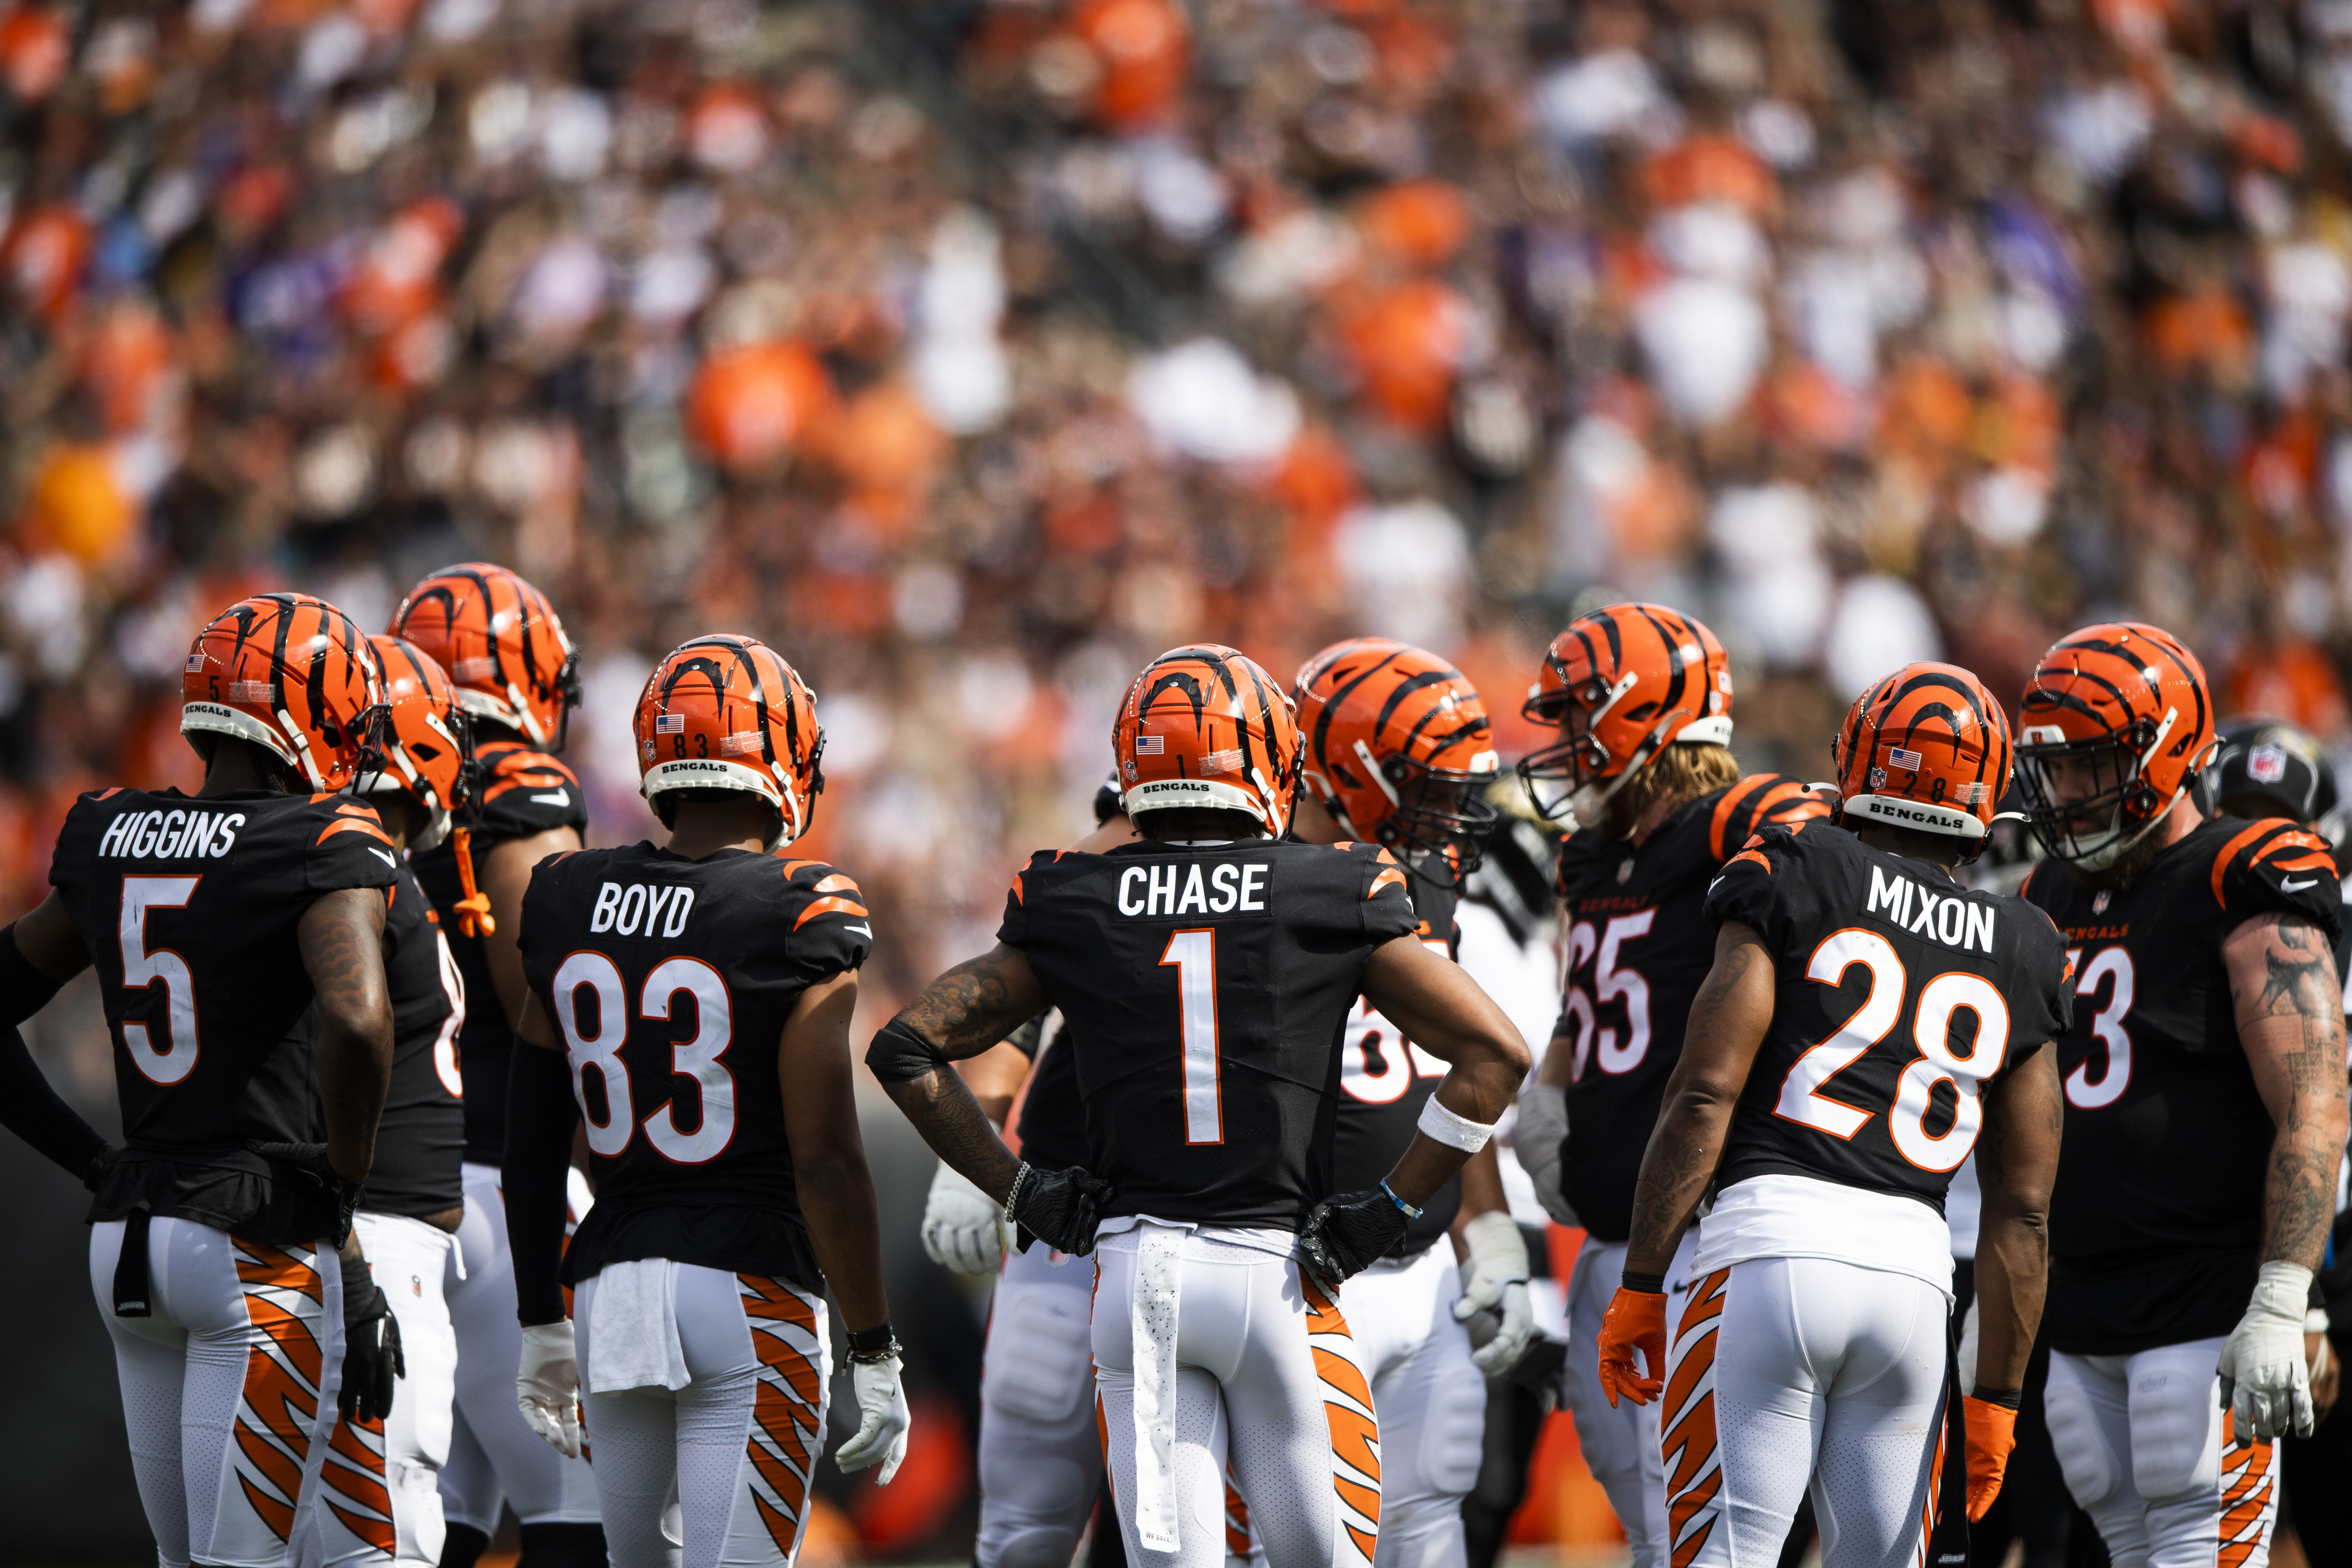 bengals odds to win super bowl at beginning of season